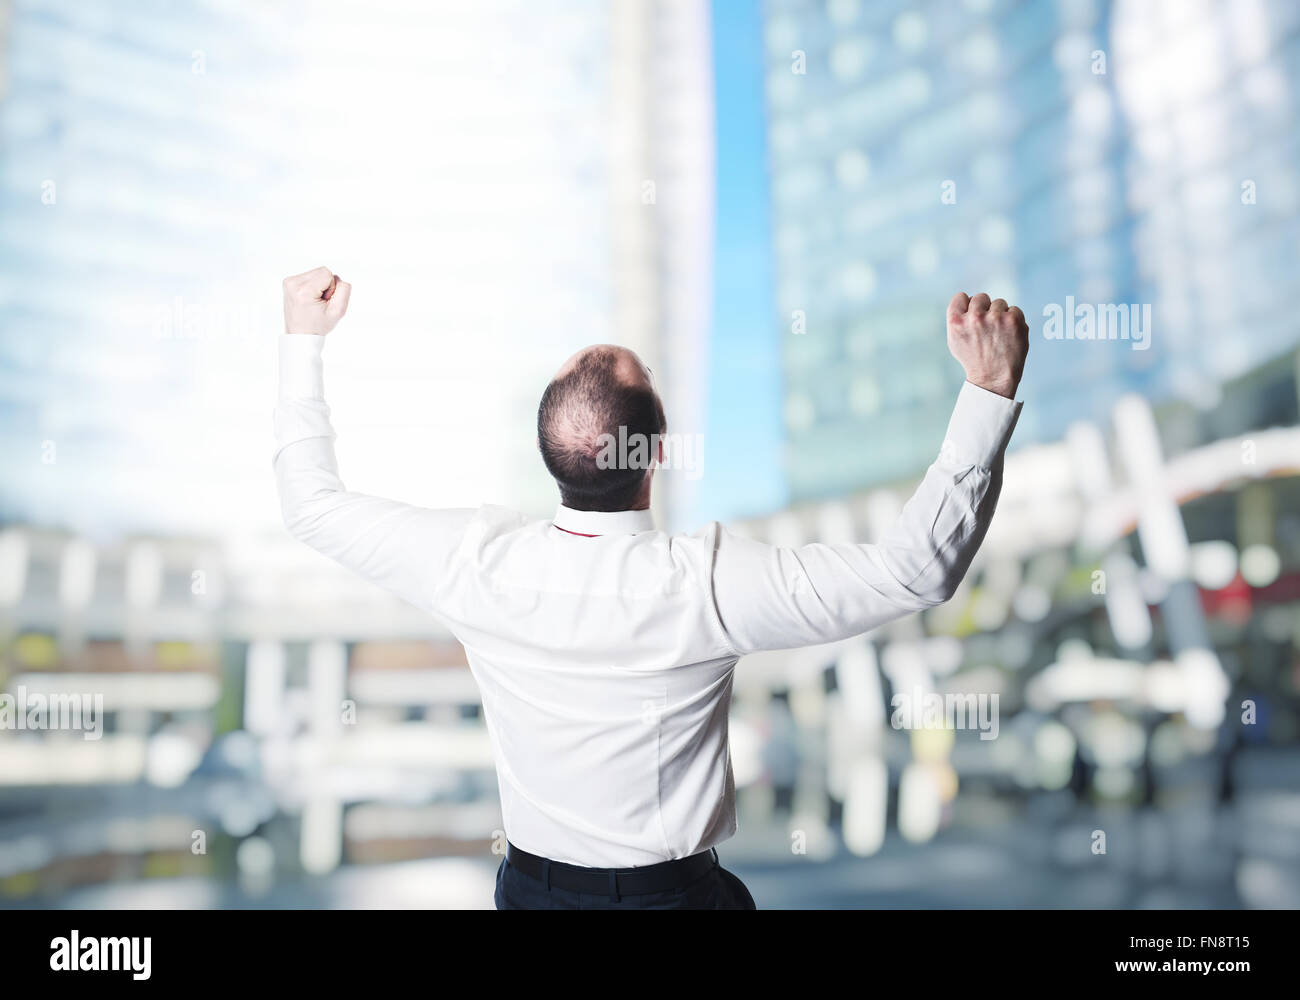 happy man and building background Stock Photo